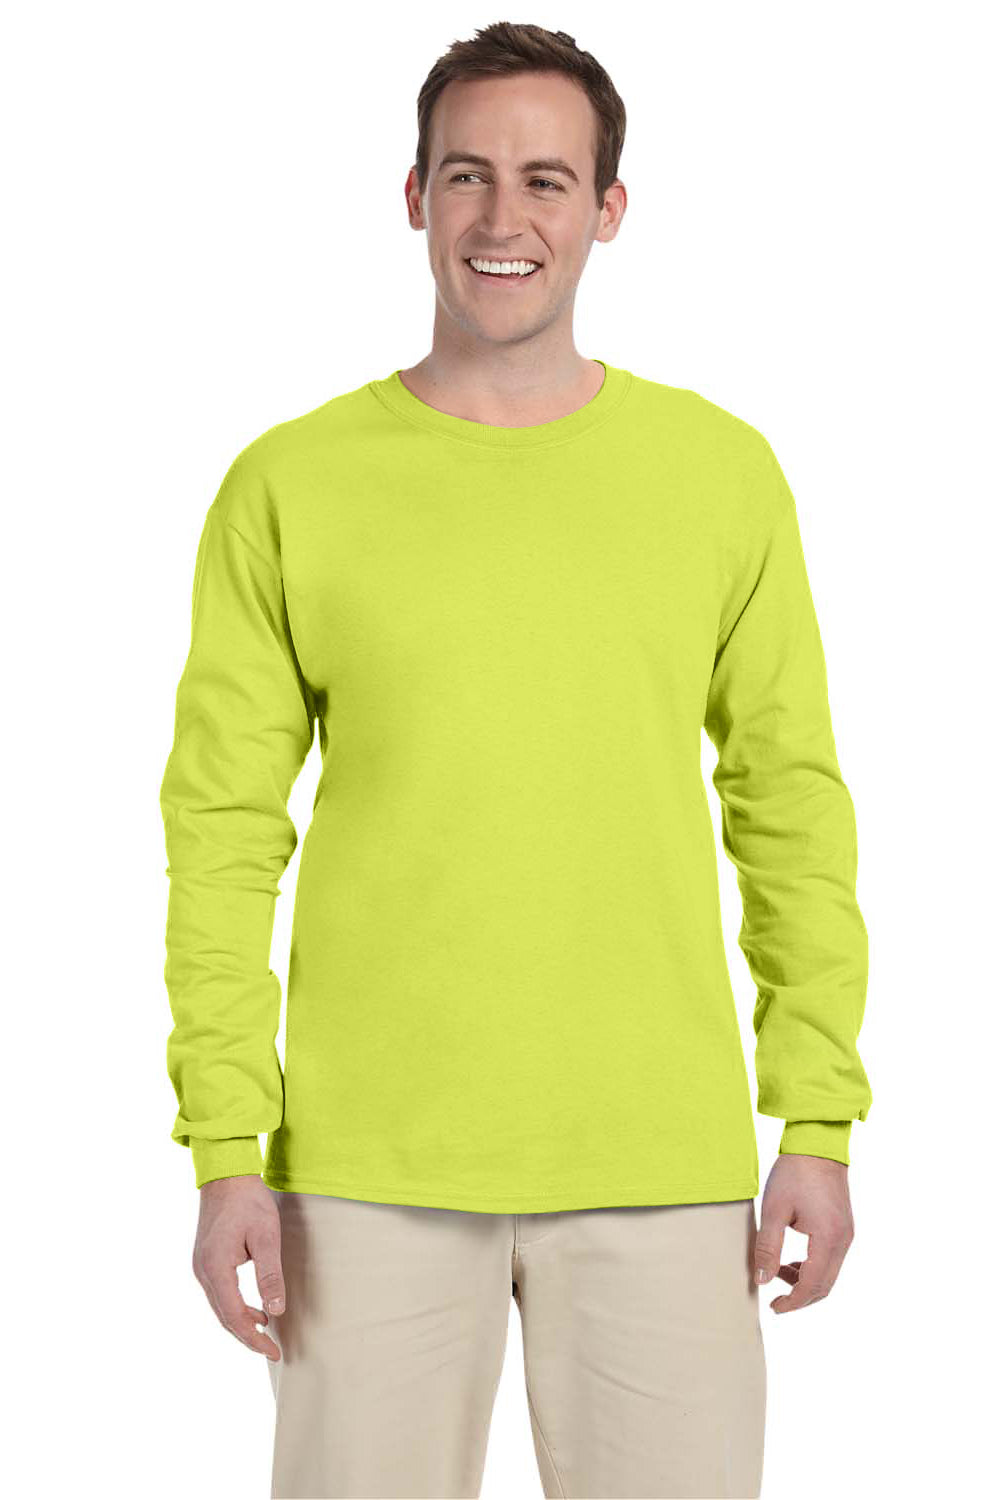 Fruit Of The Loom 4930 Mens HD Jersey Long Sleeve Crewneck T-Shirt Safety Green Front